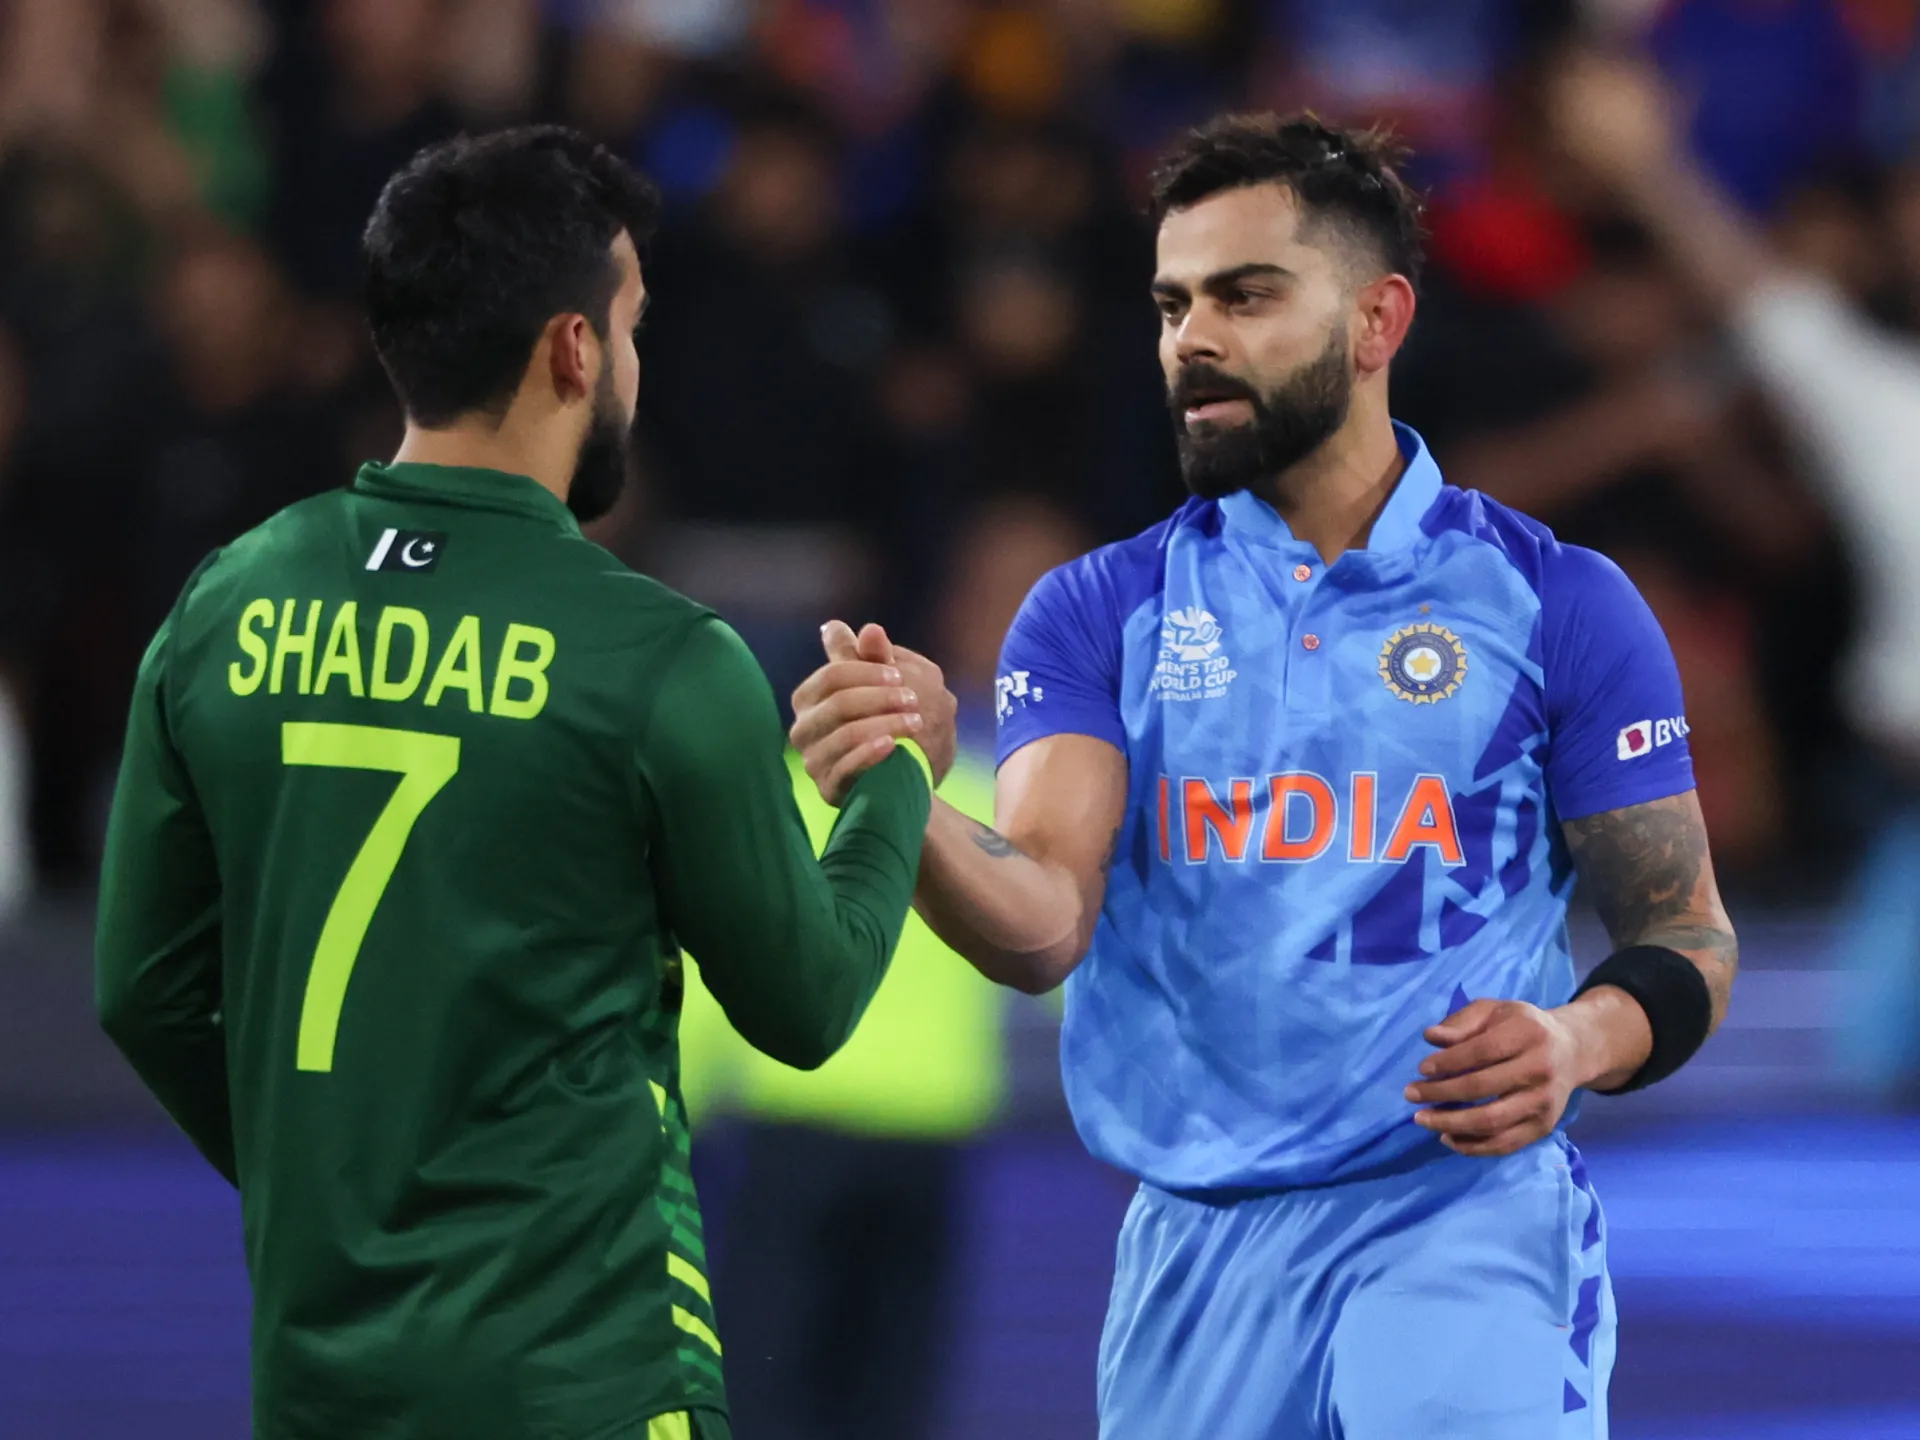 Virat Kohli of the India National Cricket Team: The Legend Behind the Most Iconic India-Pakistan Rivalry Moments